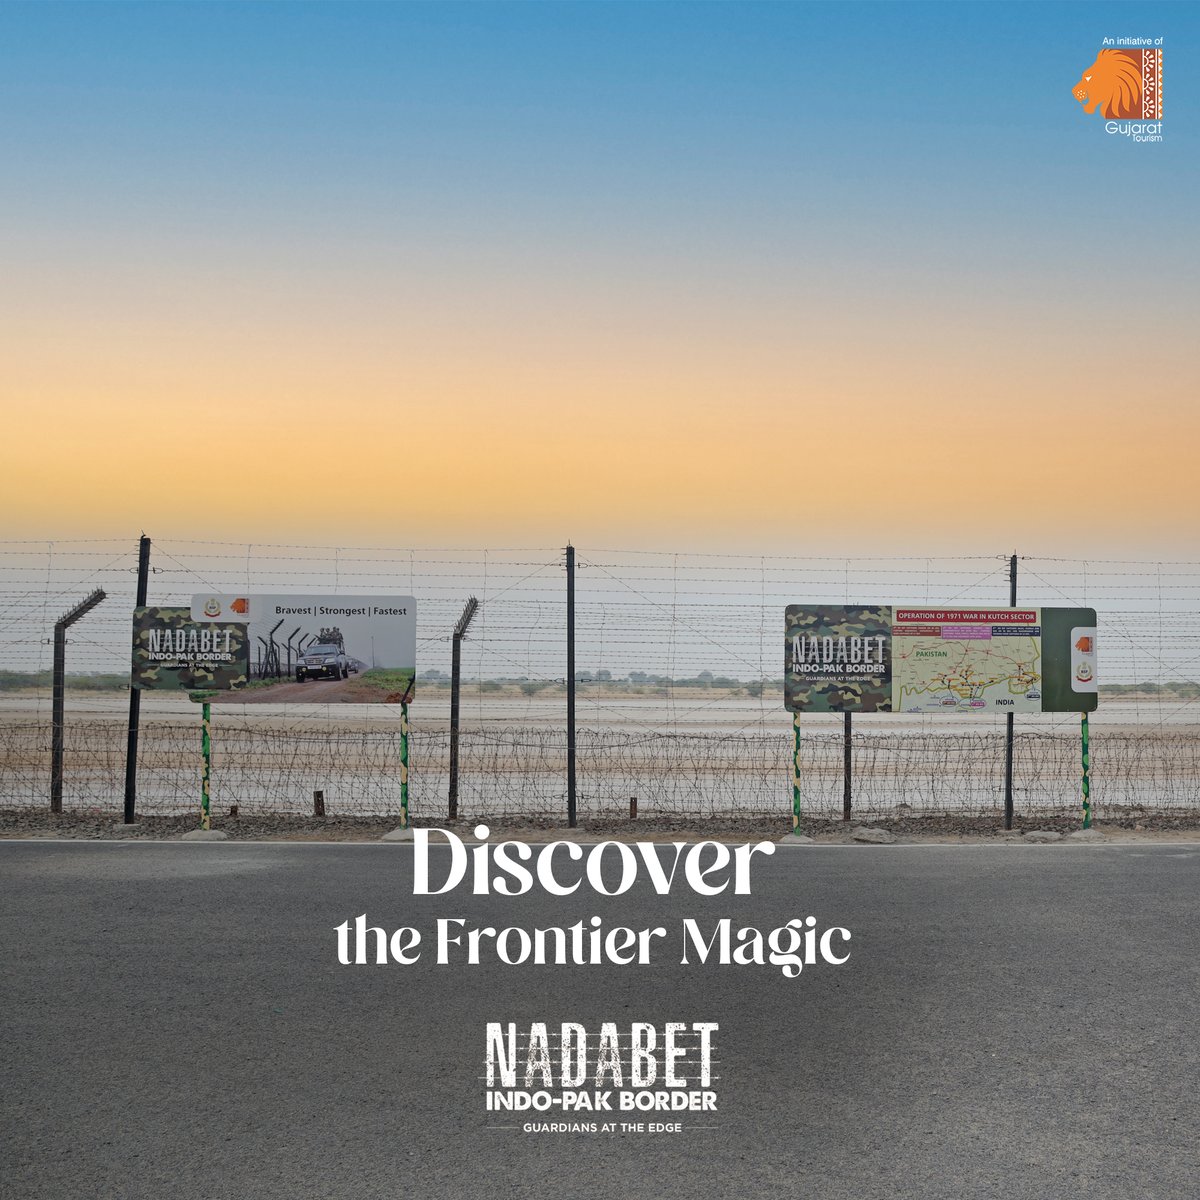 Pride, valour, enthusiasm. Nadabet Indo-Pak Border is a place to be inspired and
delighted. Visit our website to know more!

#pride #valour #enthusiasm #inspiringplaces #visitnadabet #IndoPakBorder #NadabetBorder  #IndianArmy #touristattractions #gujarattourism #exploregujarat